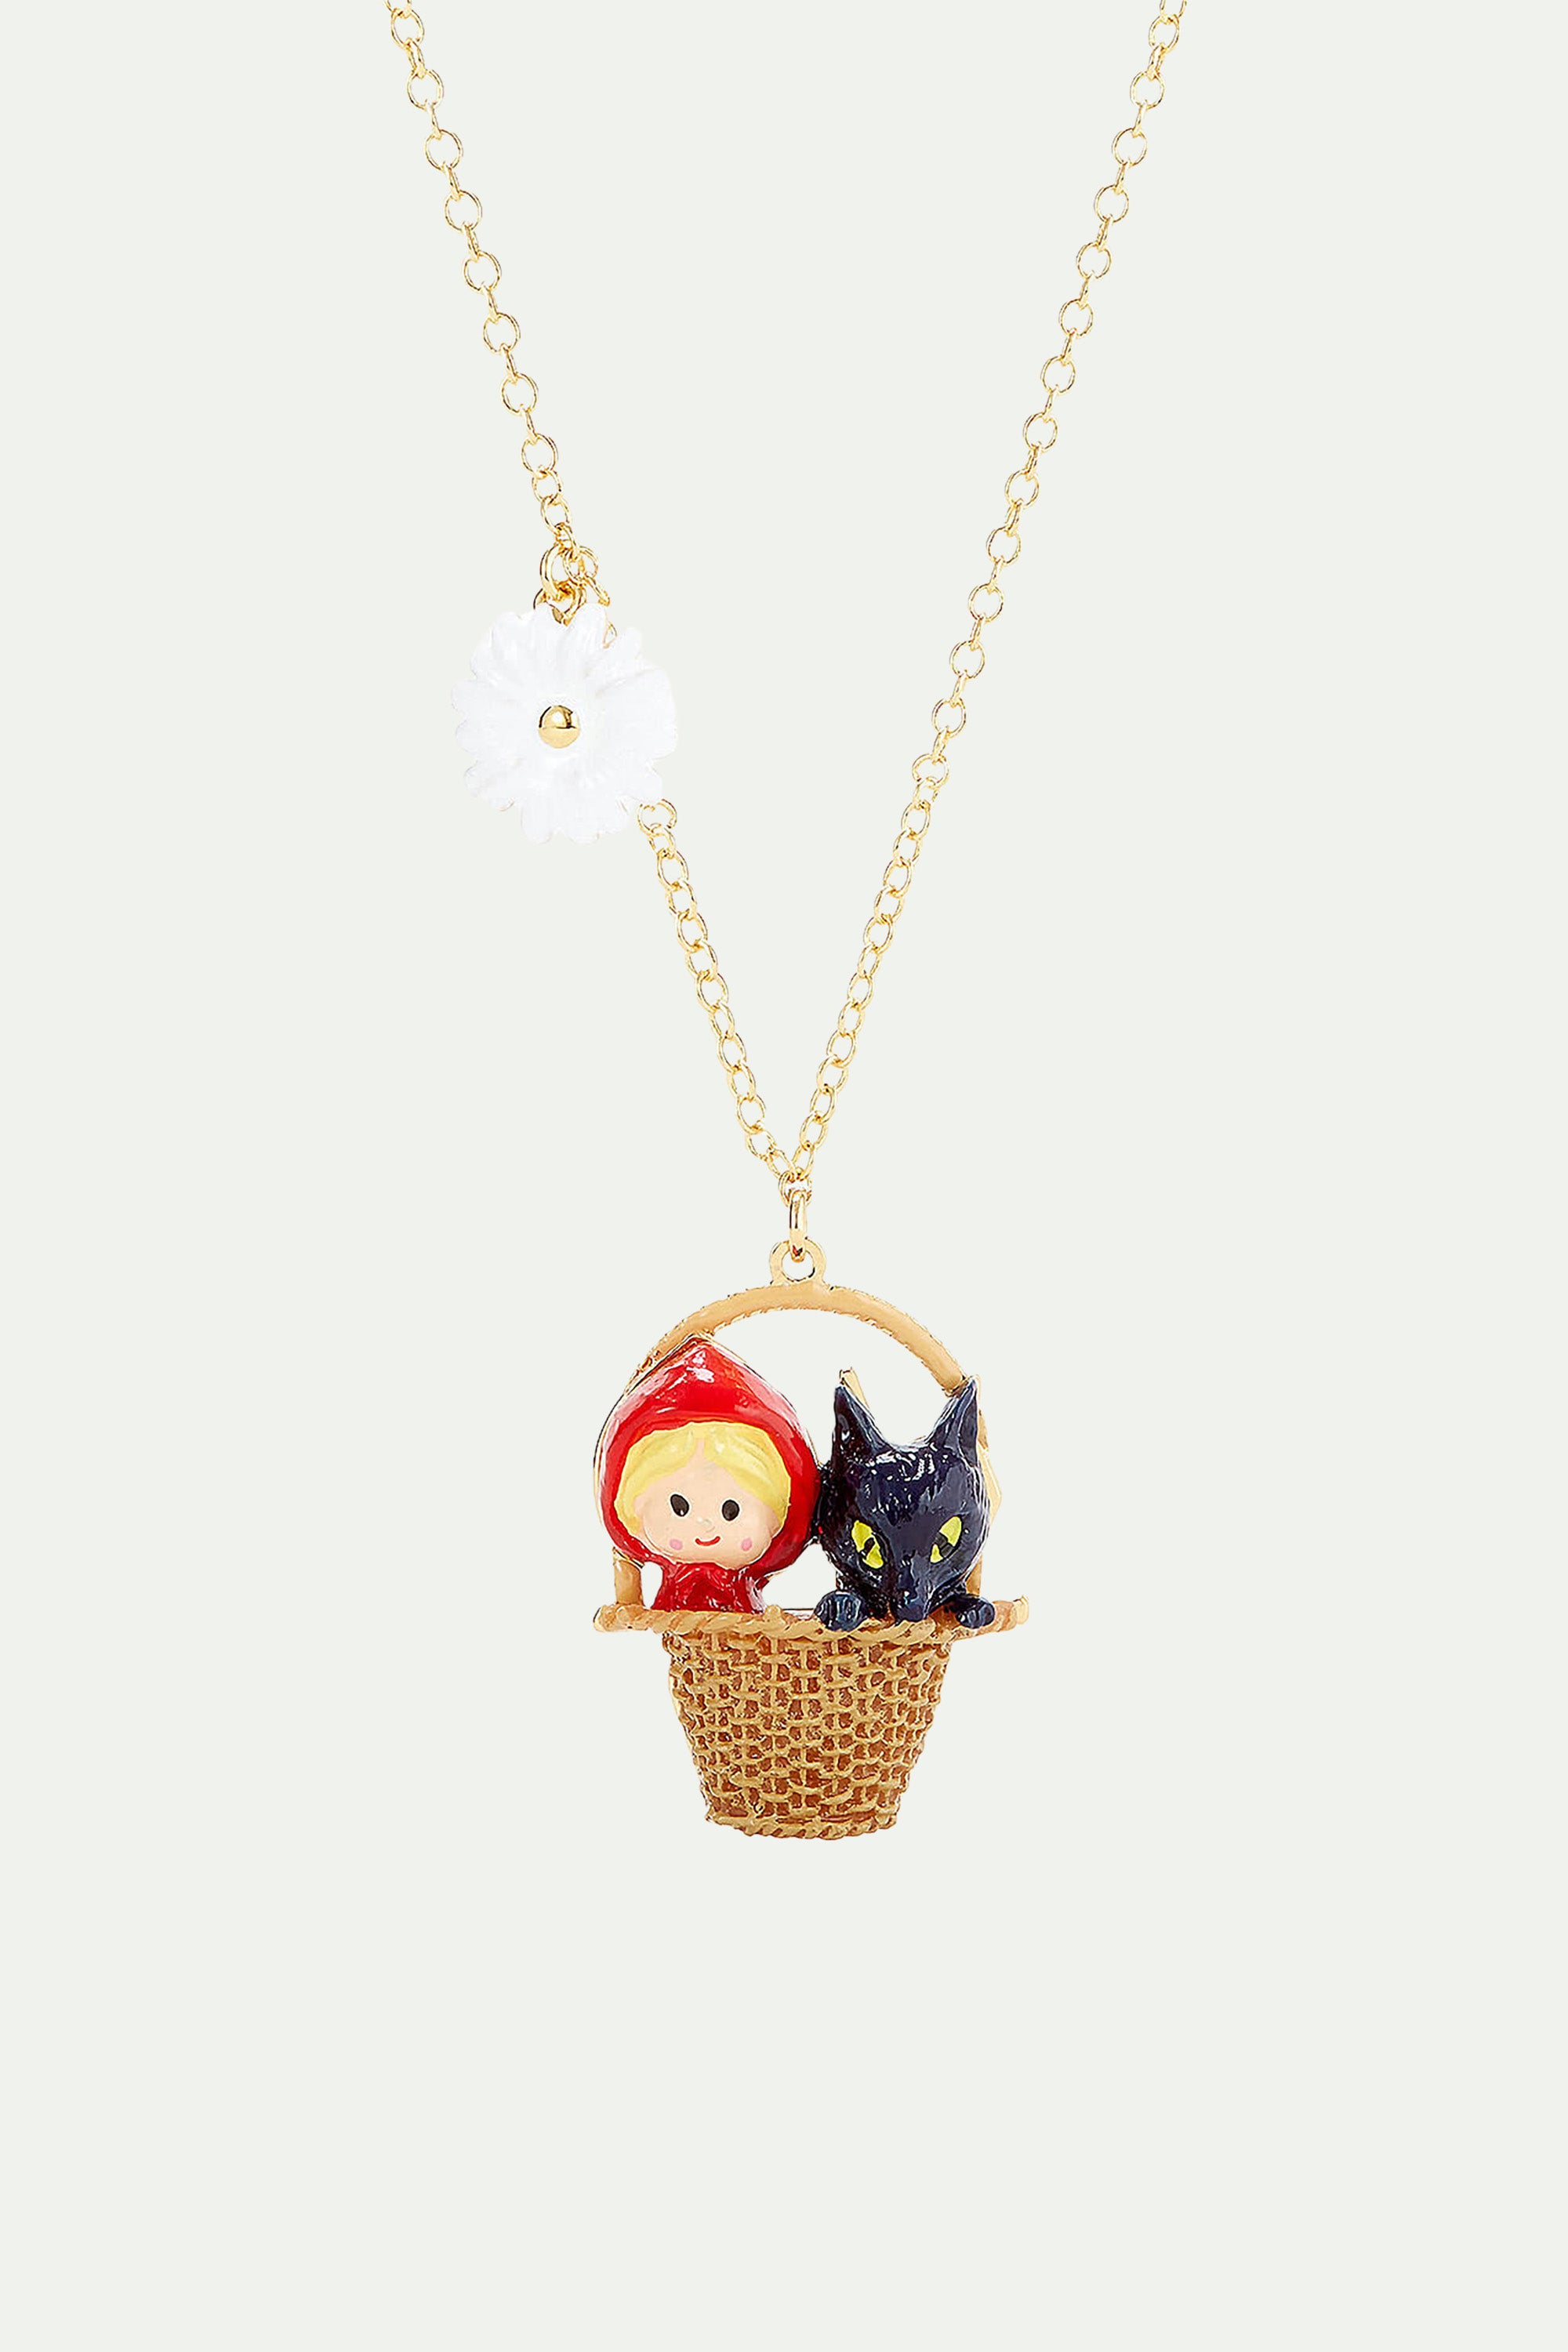 Basket, Little Red Riding Hood and Big Bad Wolf pendant necklace